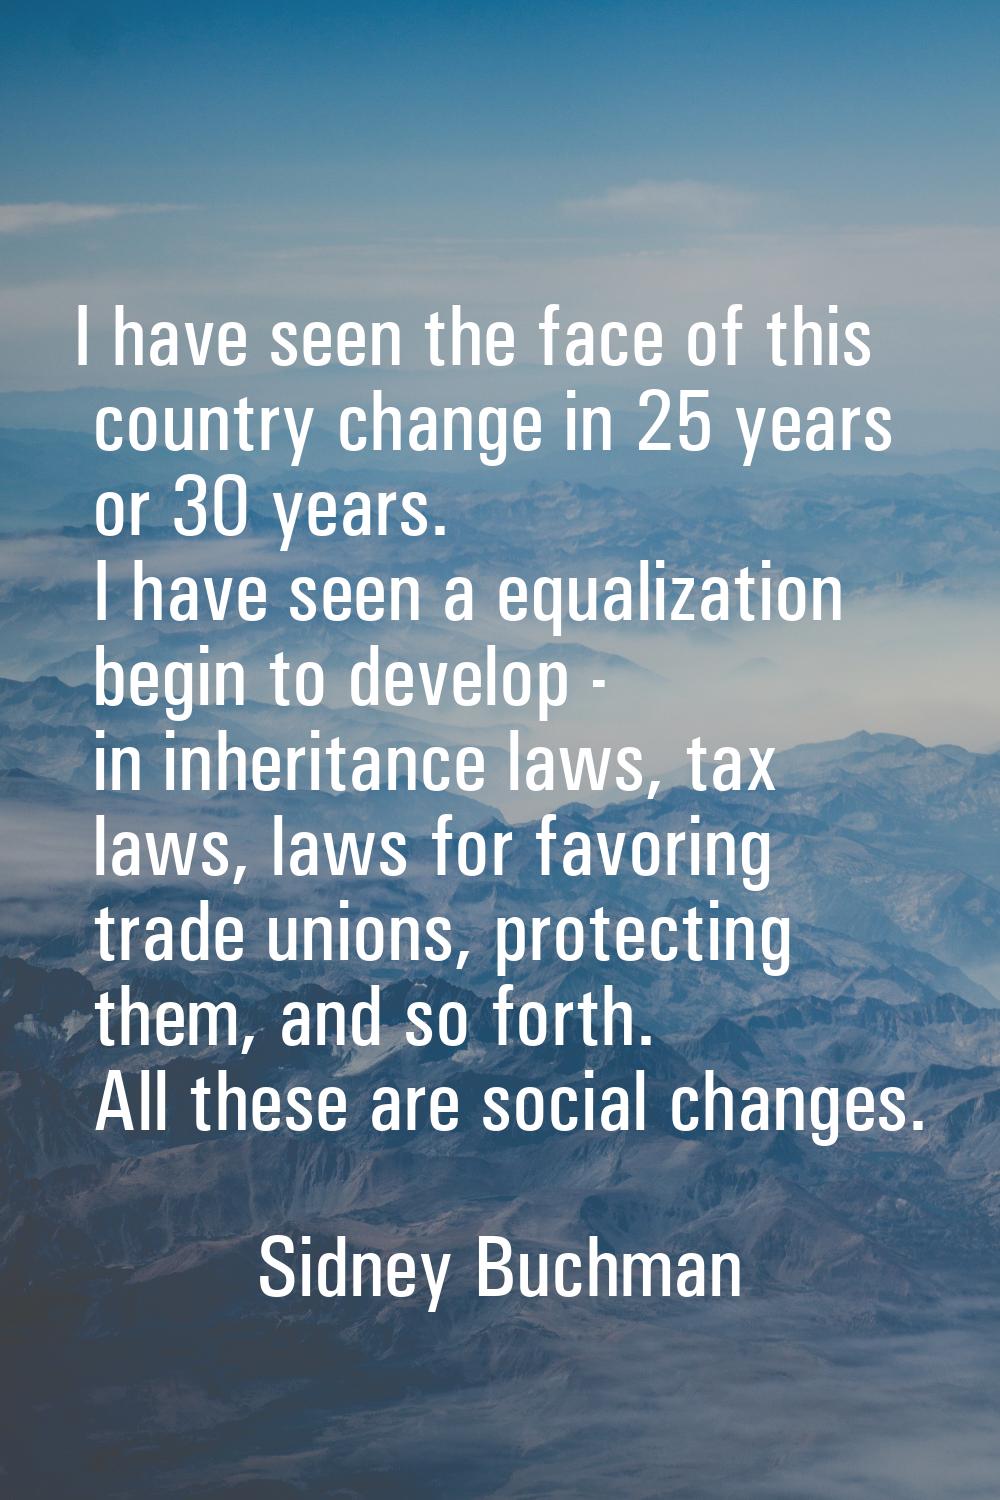 I have seen the face of this country change in 25 years or 30 years. I have seen a equalization beg